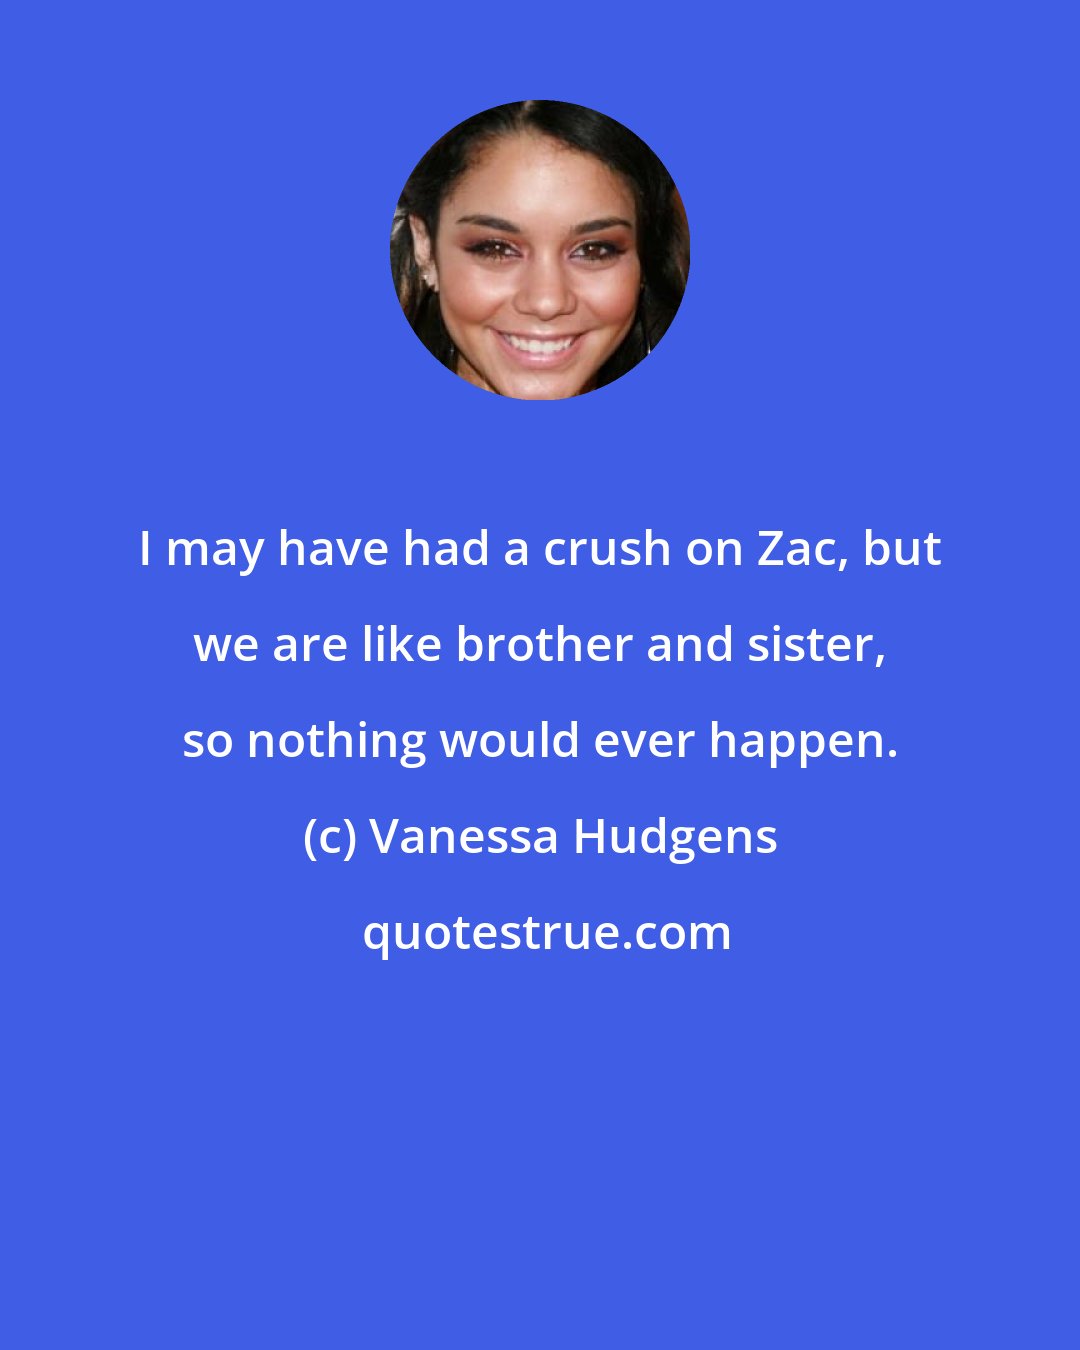 Vanessa Hudgens: I may have had a crush on Zac, but we are like brother and sister, so nothing would ever happen.